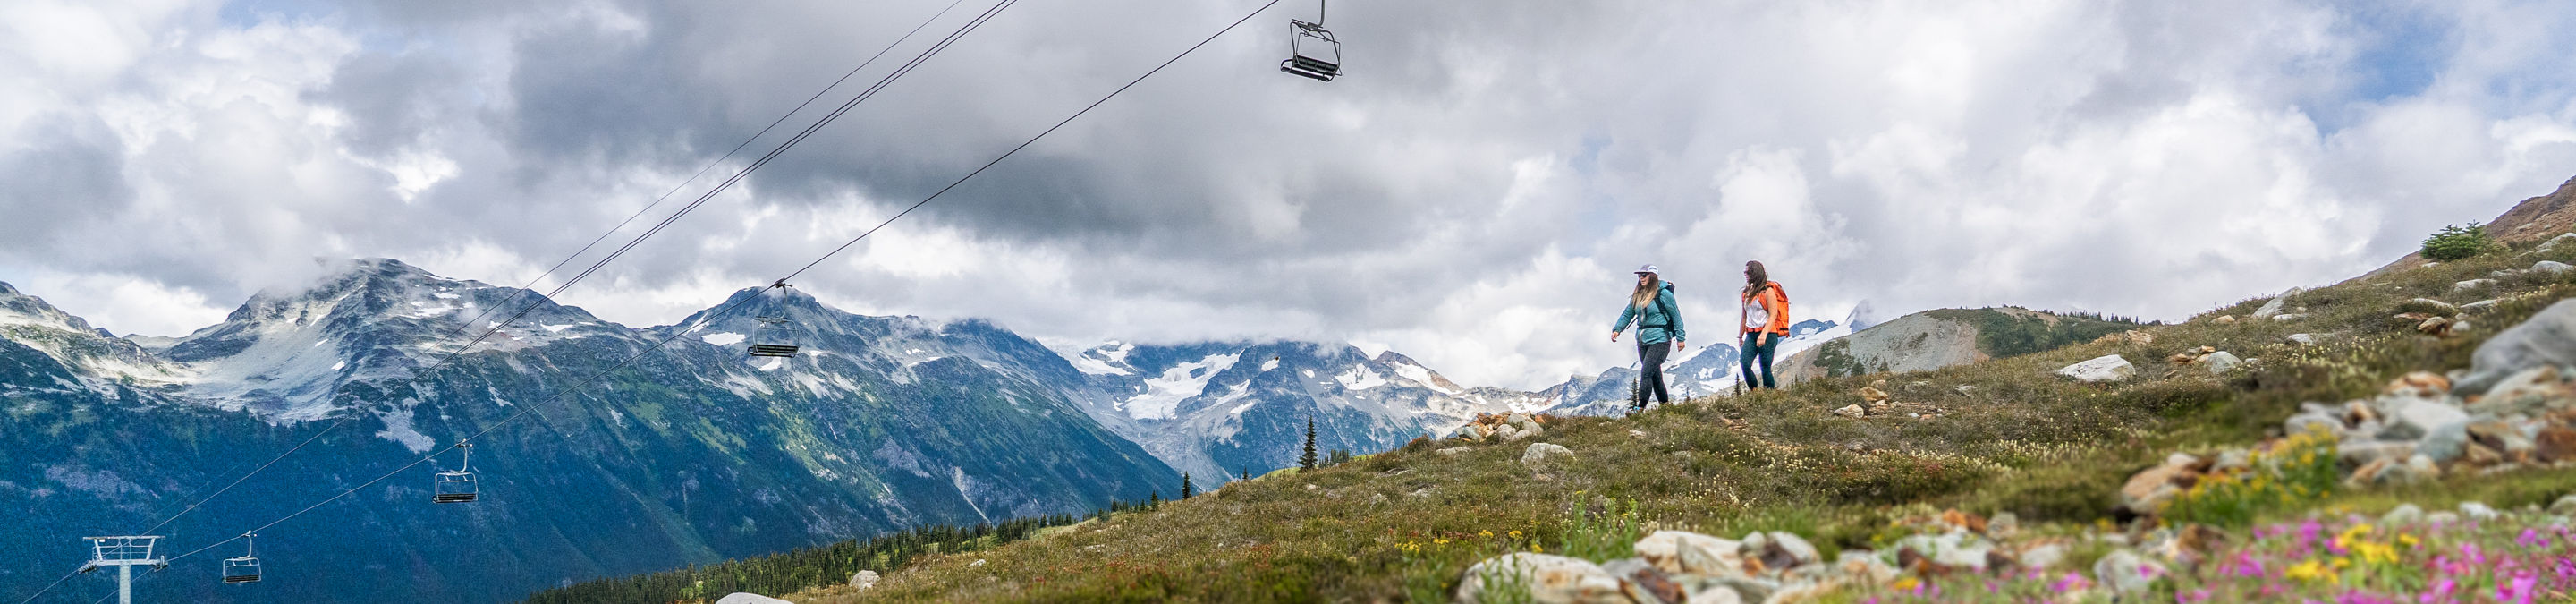 Backpackers Hike on Trail Beneath Chairlift at Whistler Blackcomb During Summer